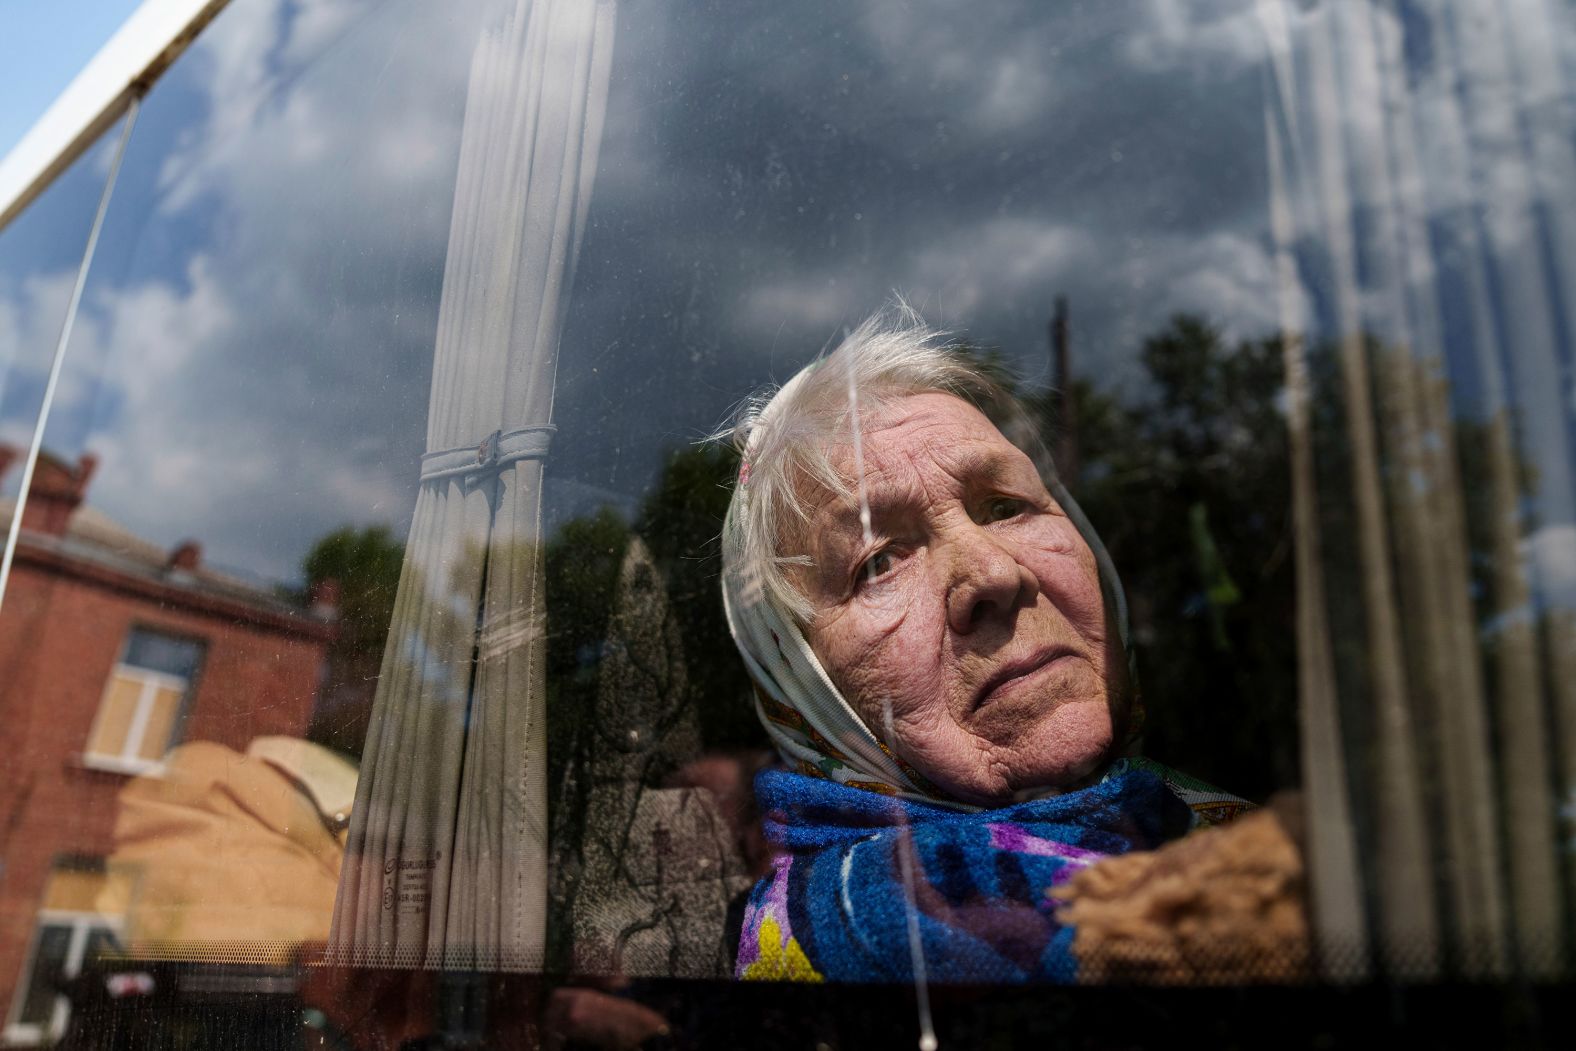 Liudmila, 85, looks though the window of a bus after being evacuated from Vovchansk, Ukraine, on Sunday, May 12. Her husband was killed in their house after a <a href="index.php?page=&url=https%3A%2F%2Fwww.cnn.com%2F2024%2F05%2F11%2Feurope%2Fukraine-kharkiv-russia-attack-intl%2Findex.html" target="_blank">Russian airstrike on the city</a>.